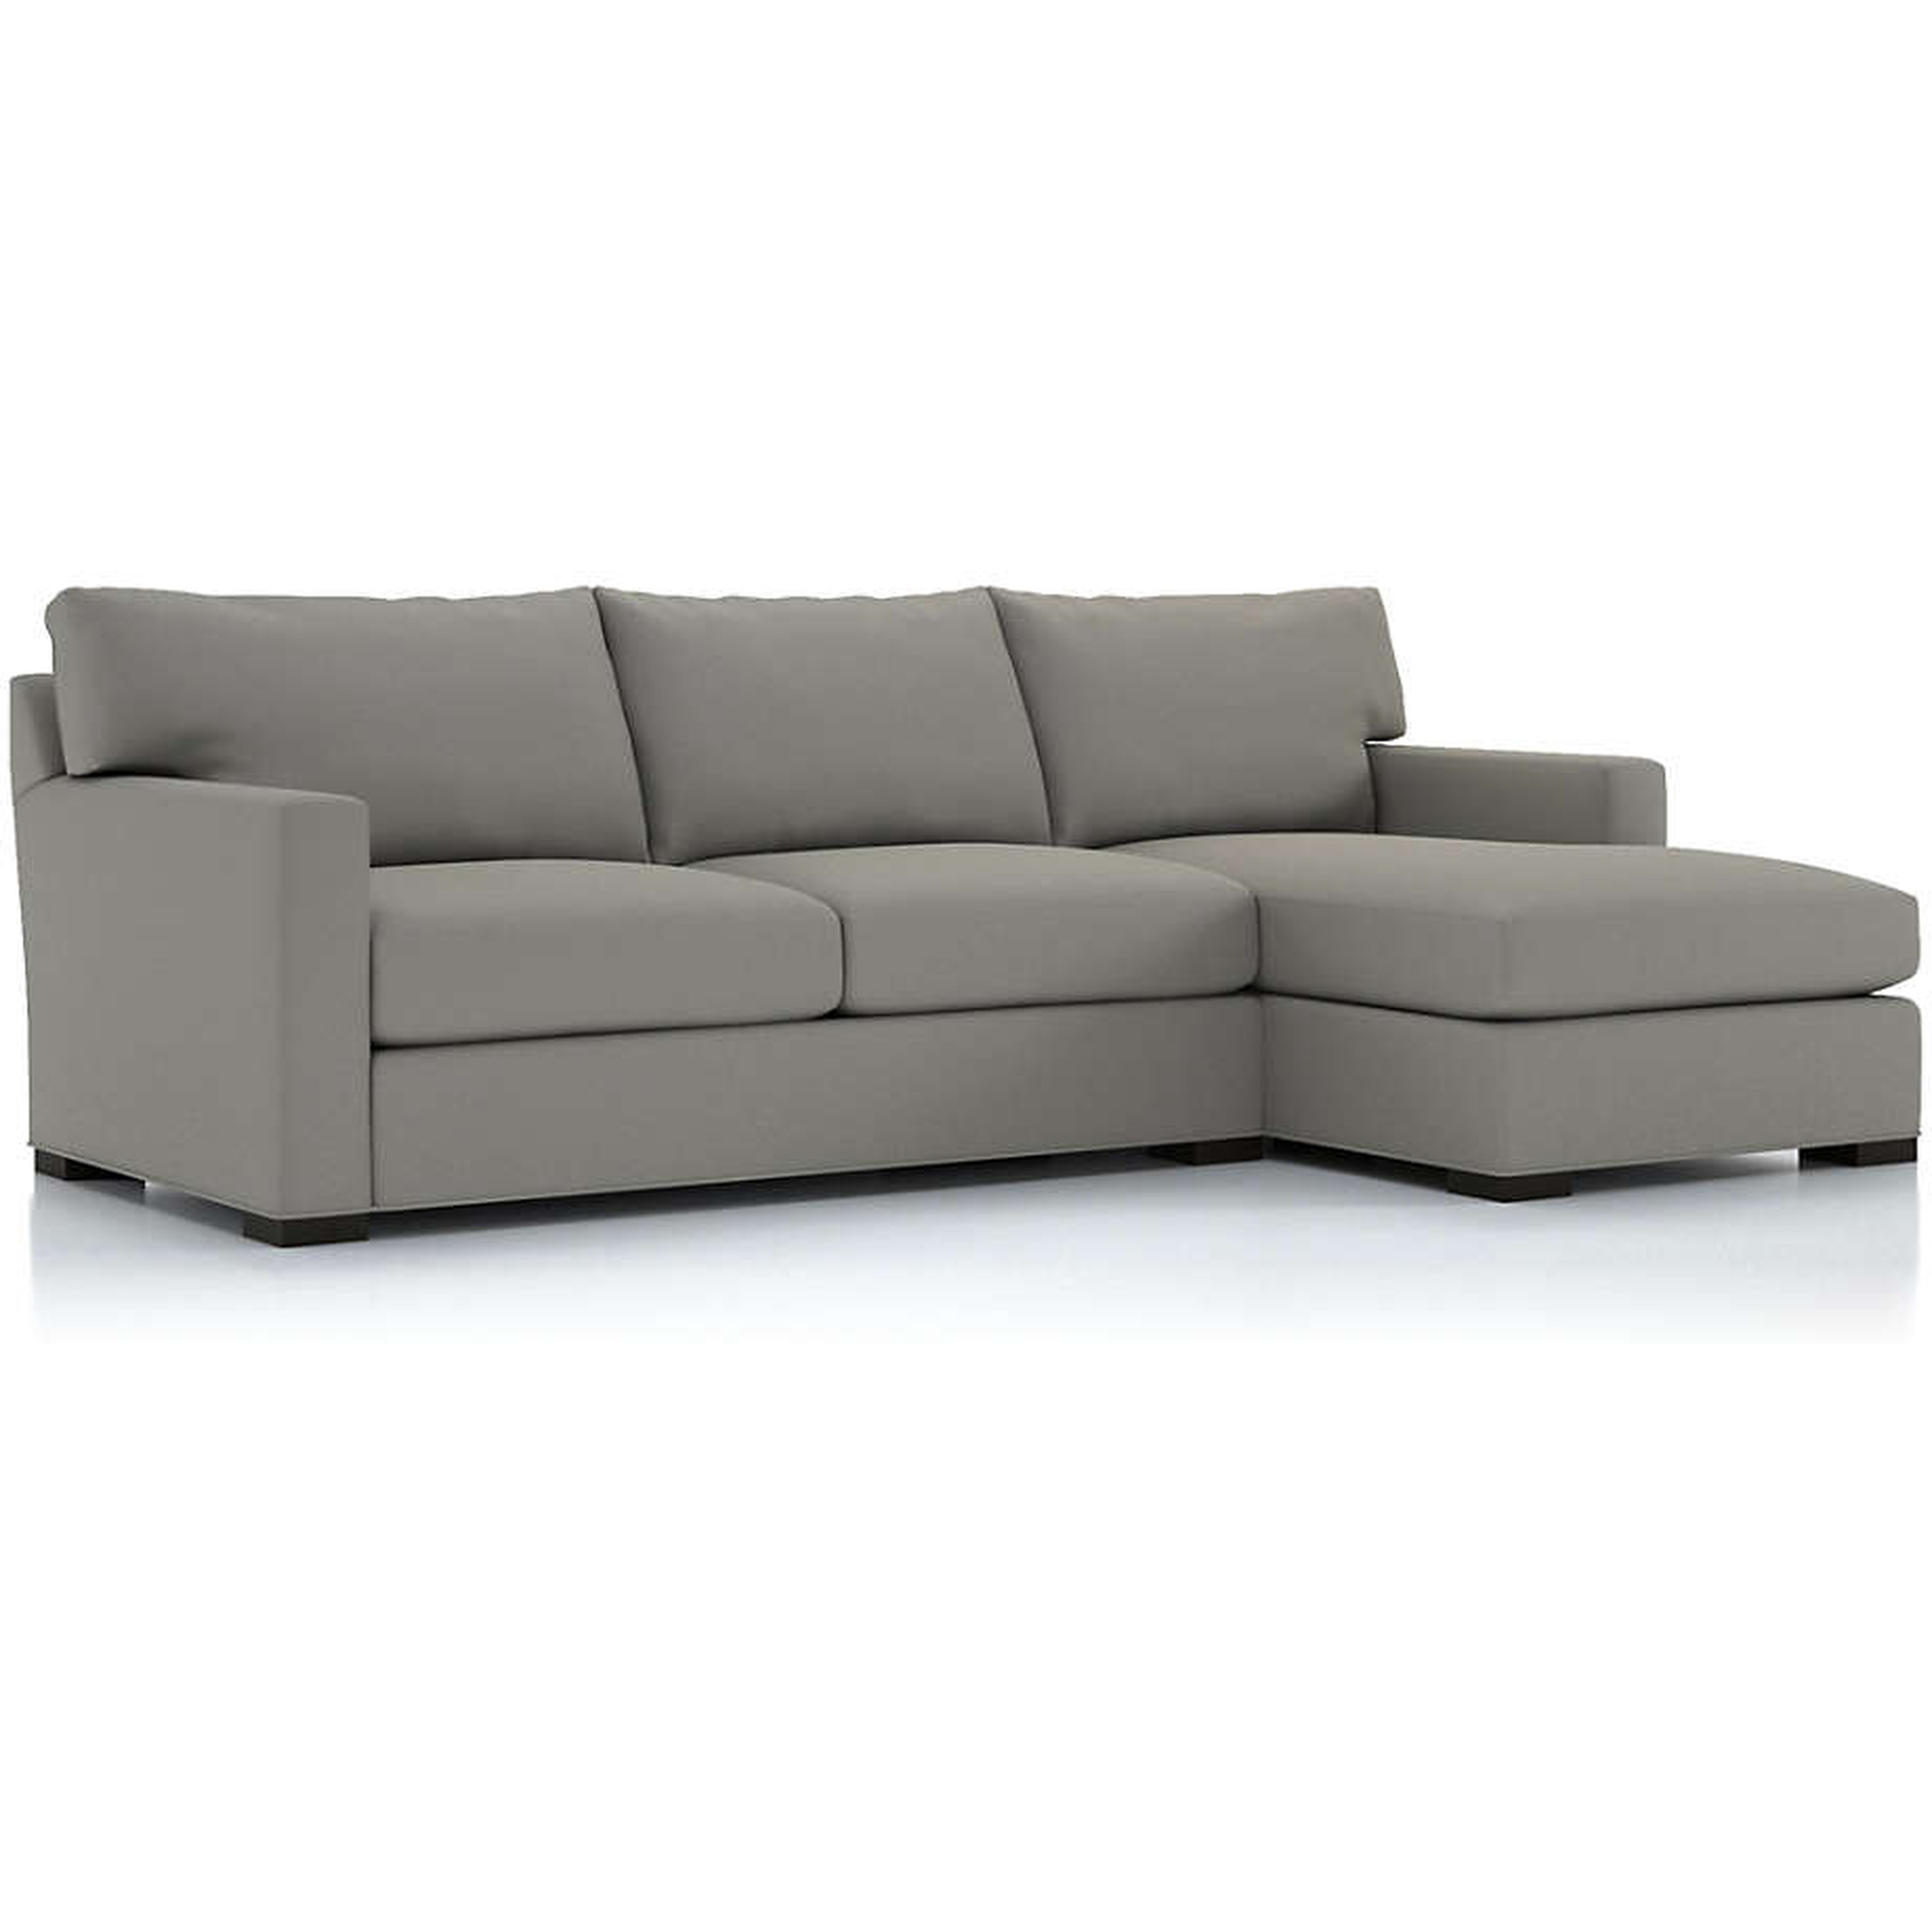 Axis II 2-Piece Sectional Sofa Right ARm - Crate and Barrel